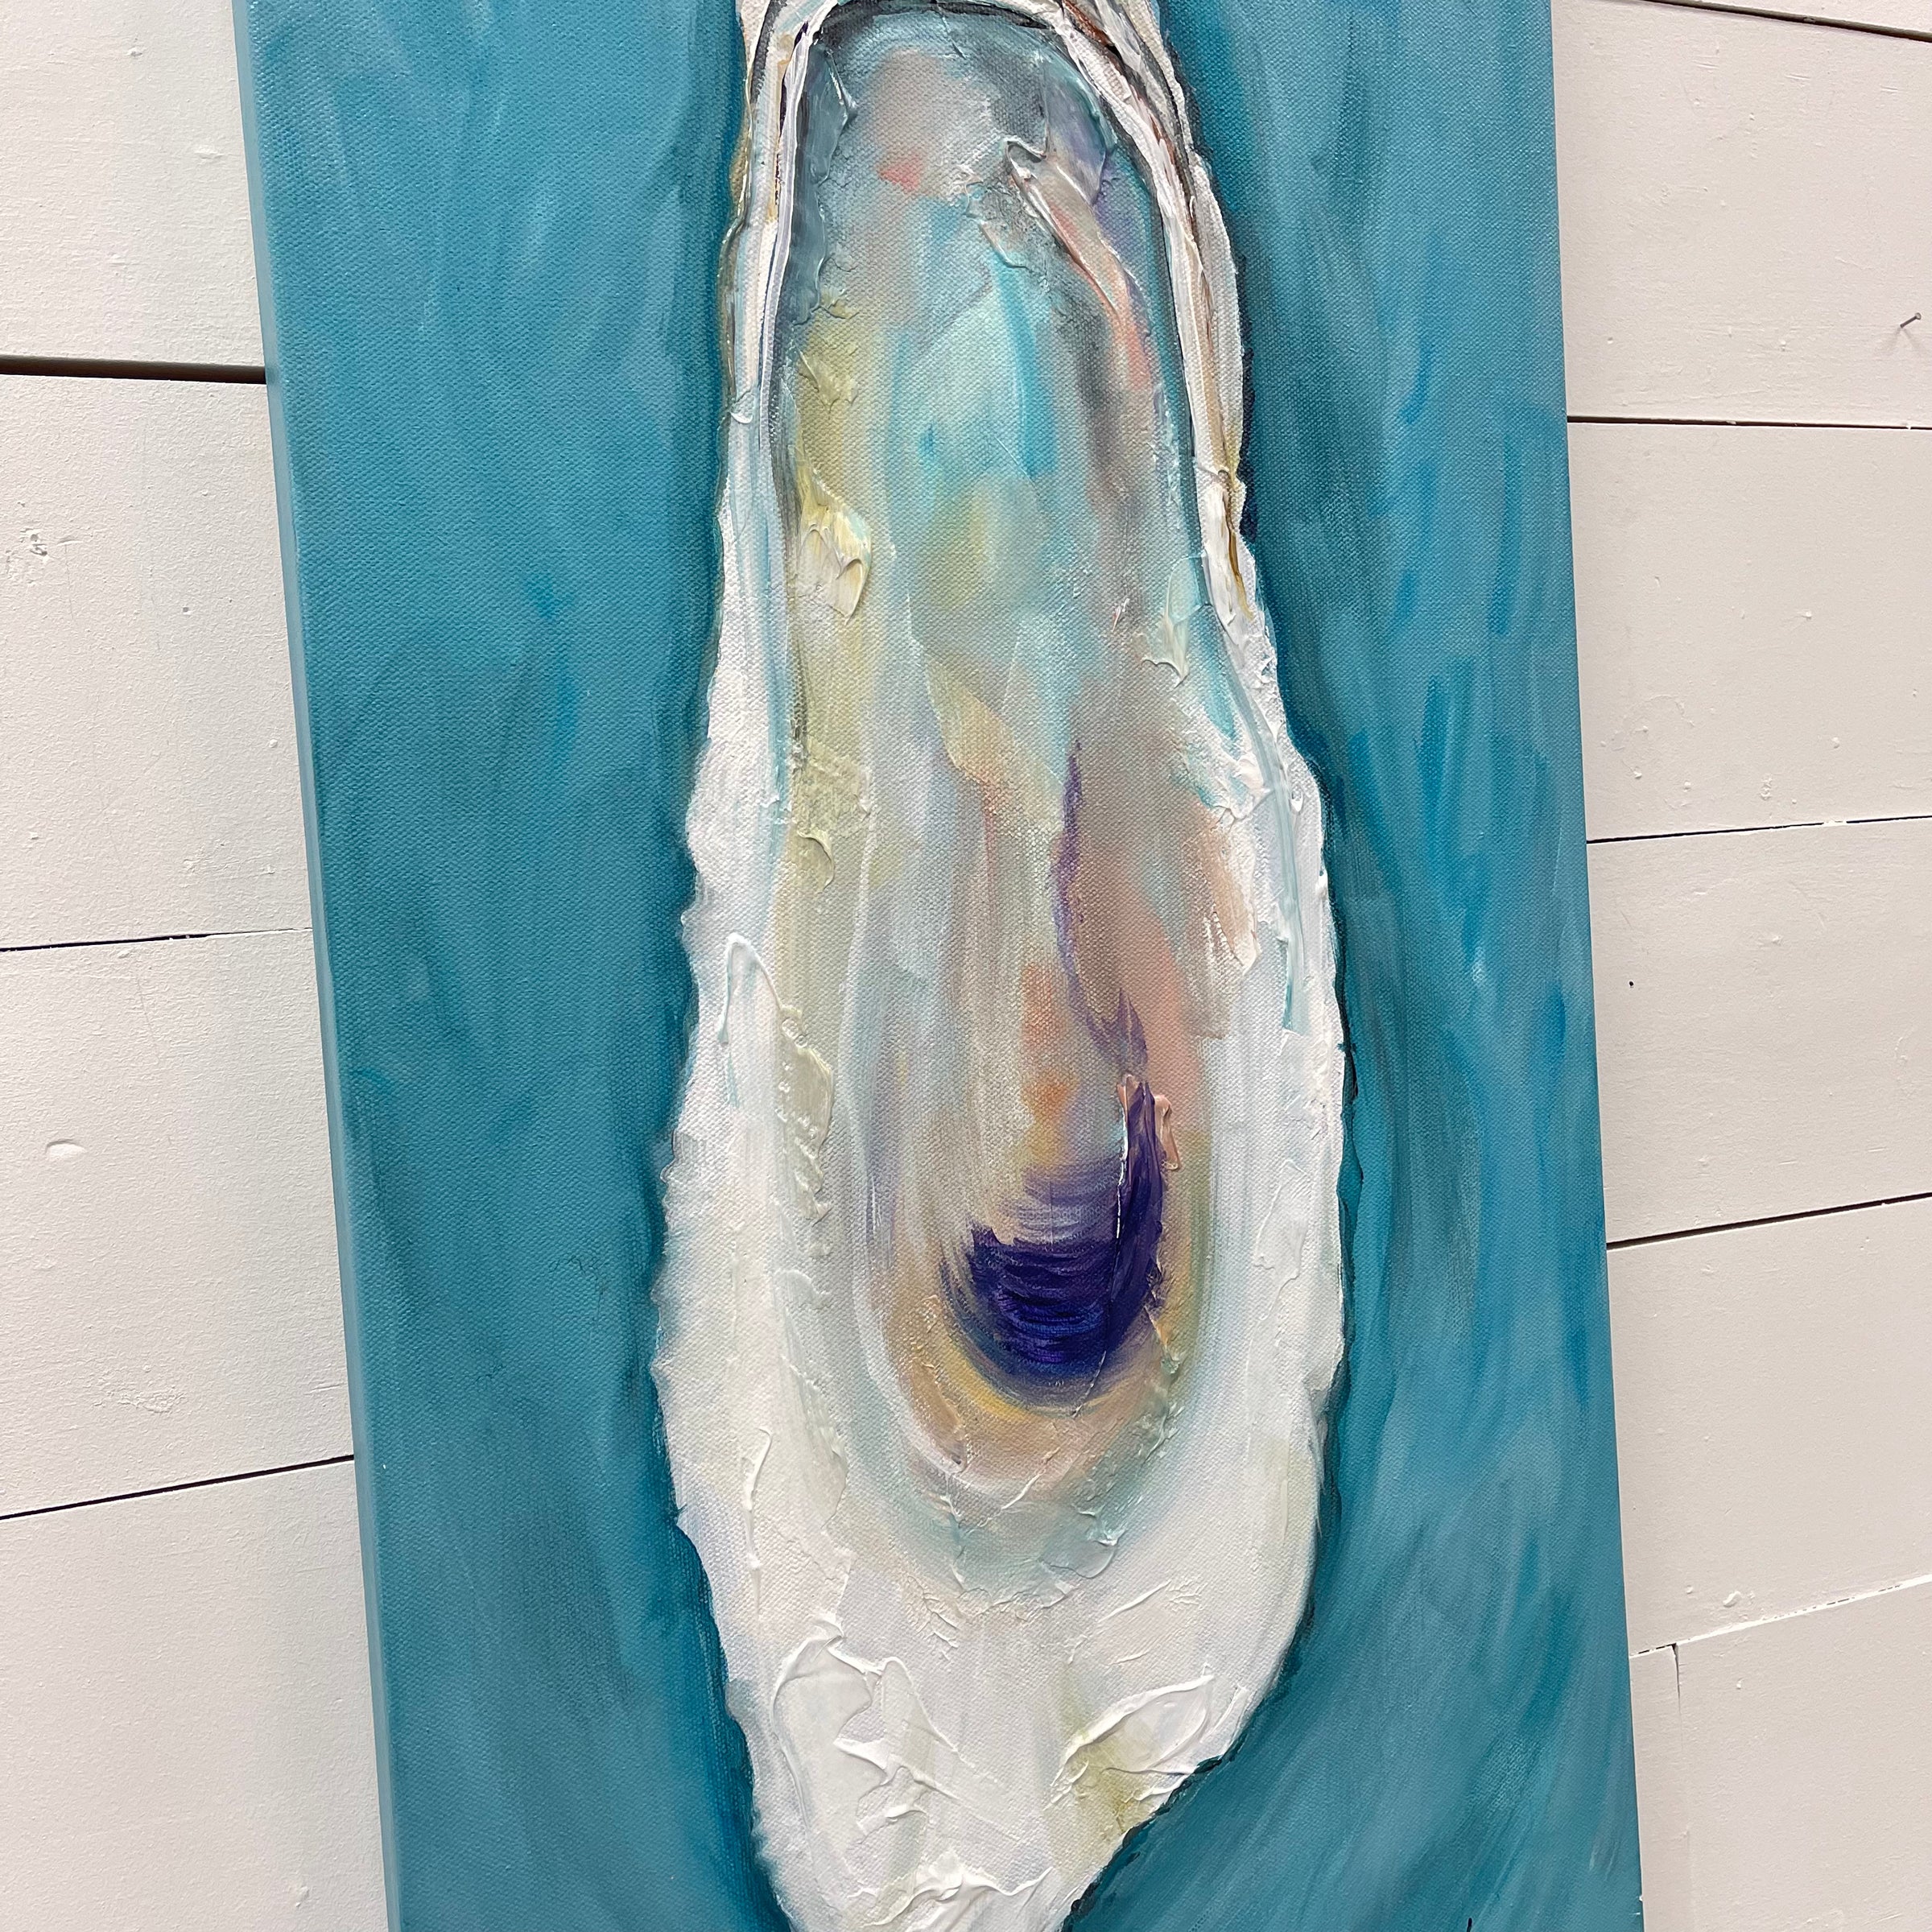 Oyster Shell Painting